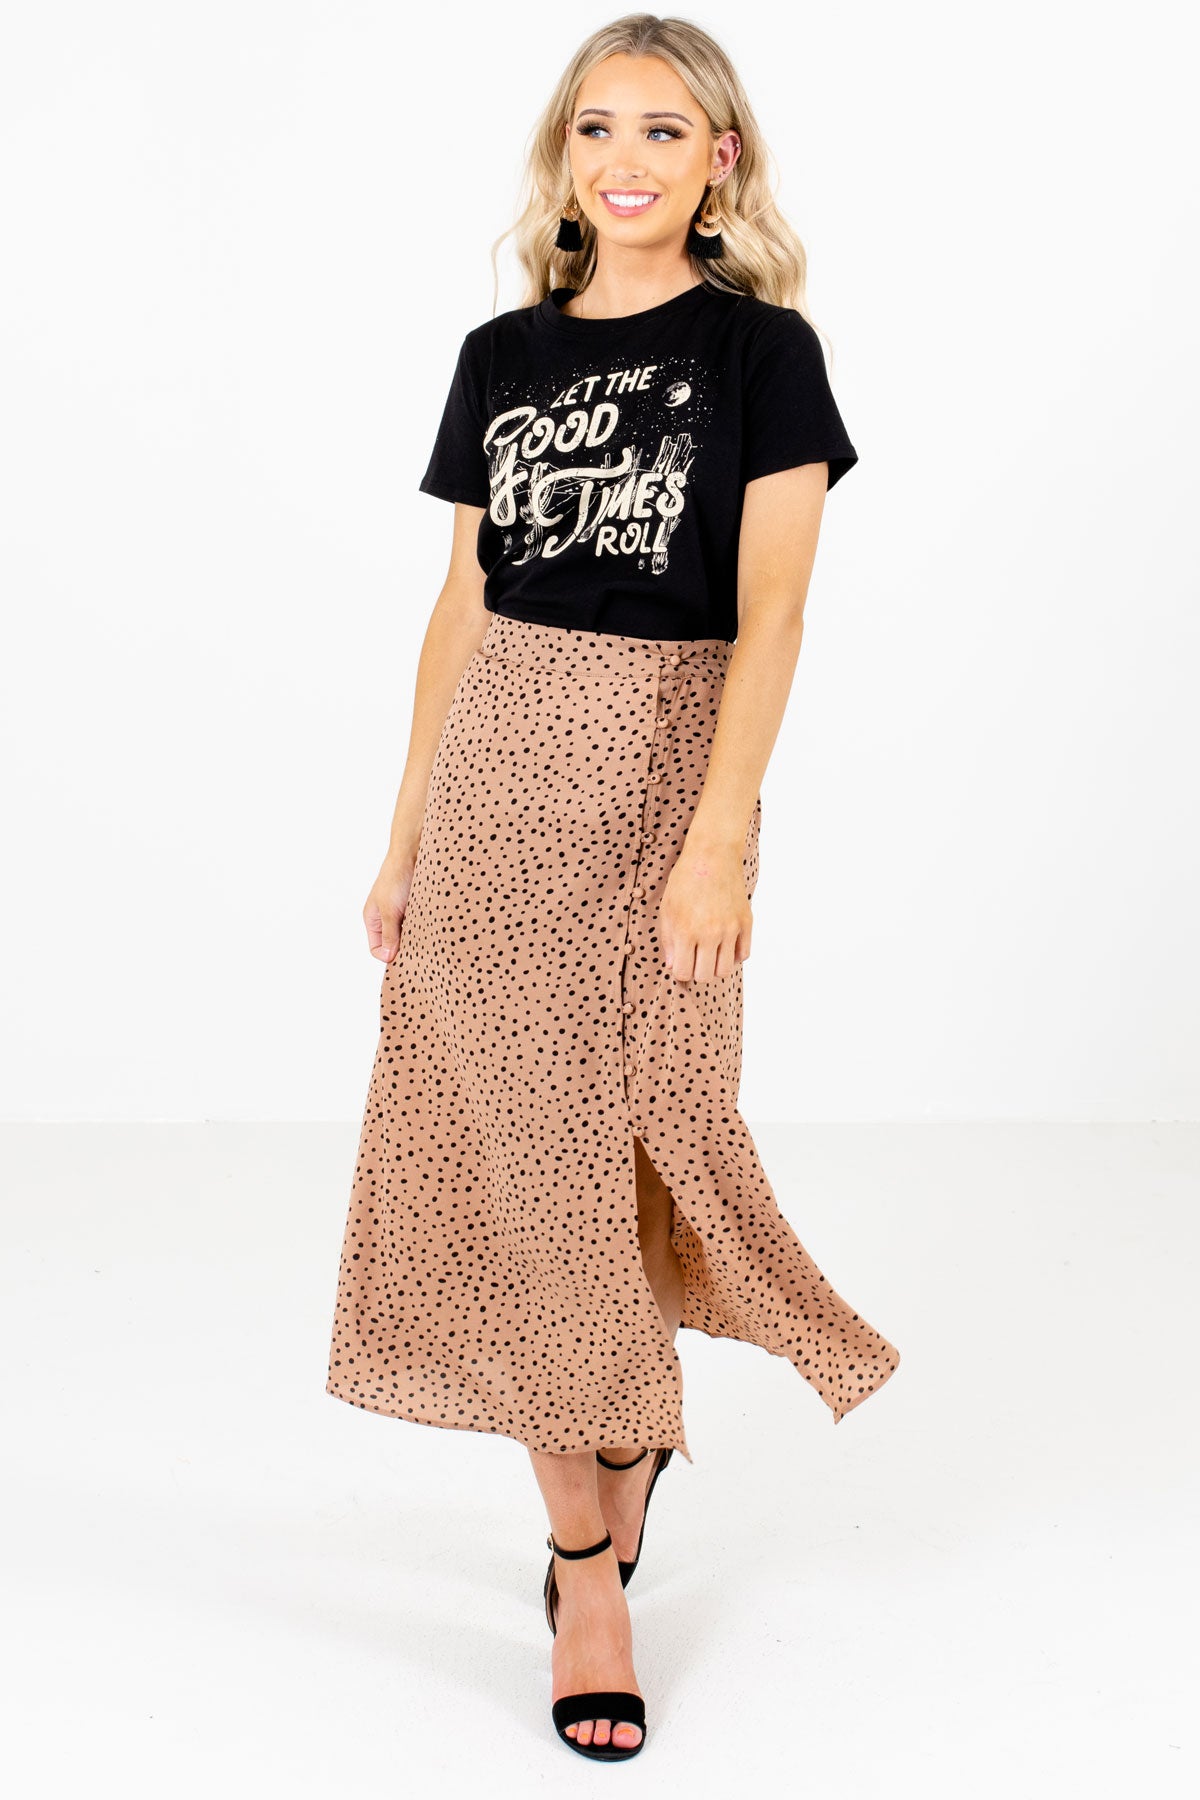 Crazy About You Tan Brown Midi Skirt | Boutique Skirts